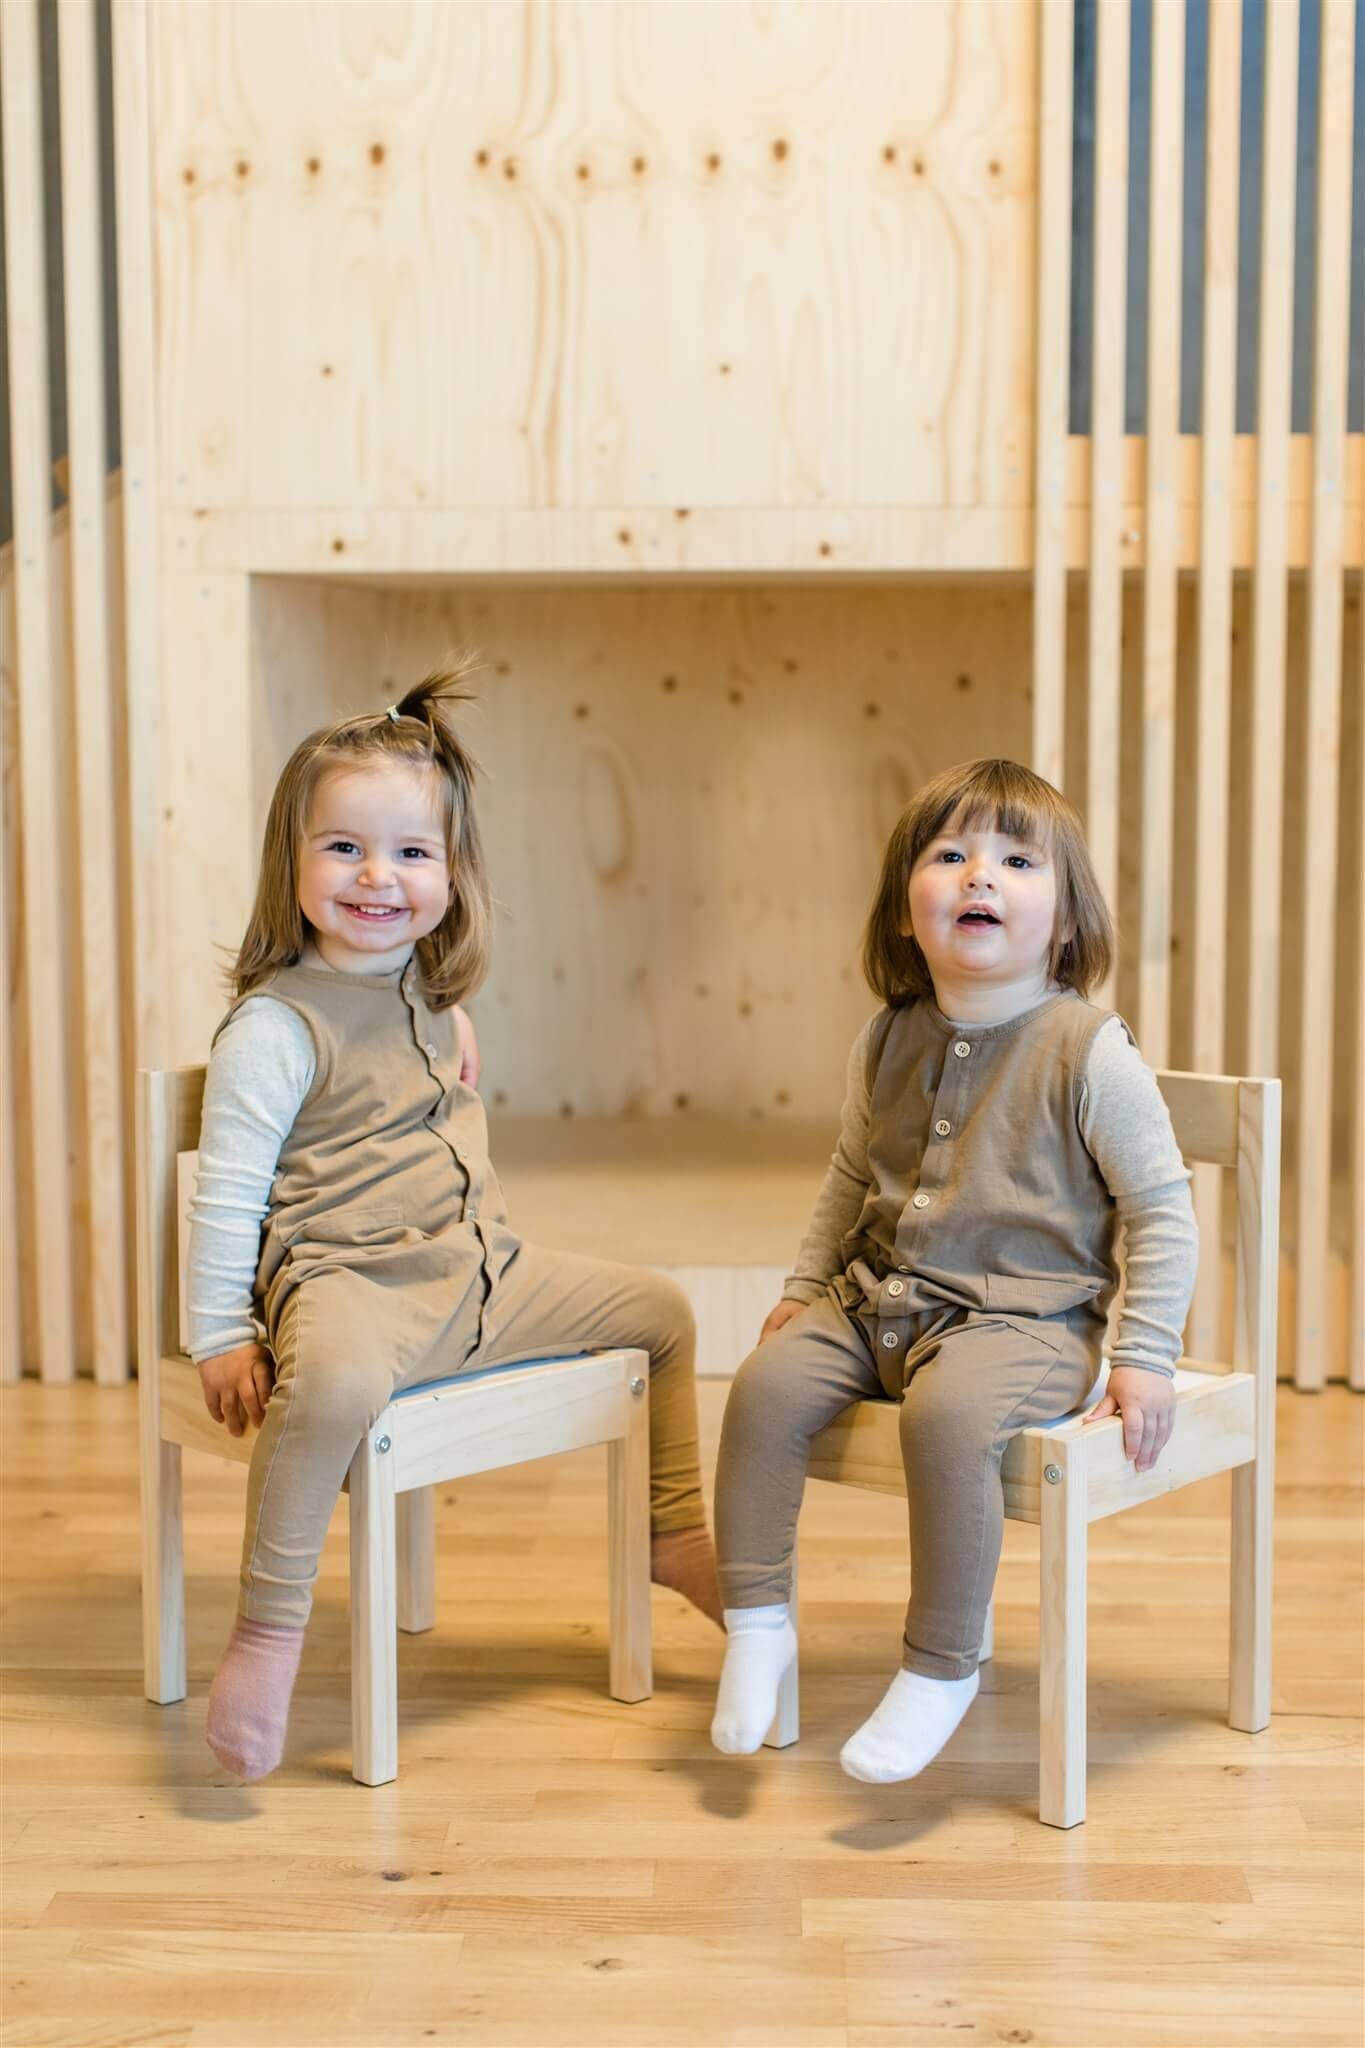 Two children with brown hair and brown clothes from OiOiOi each sitting smiling on wooden chairs